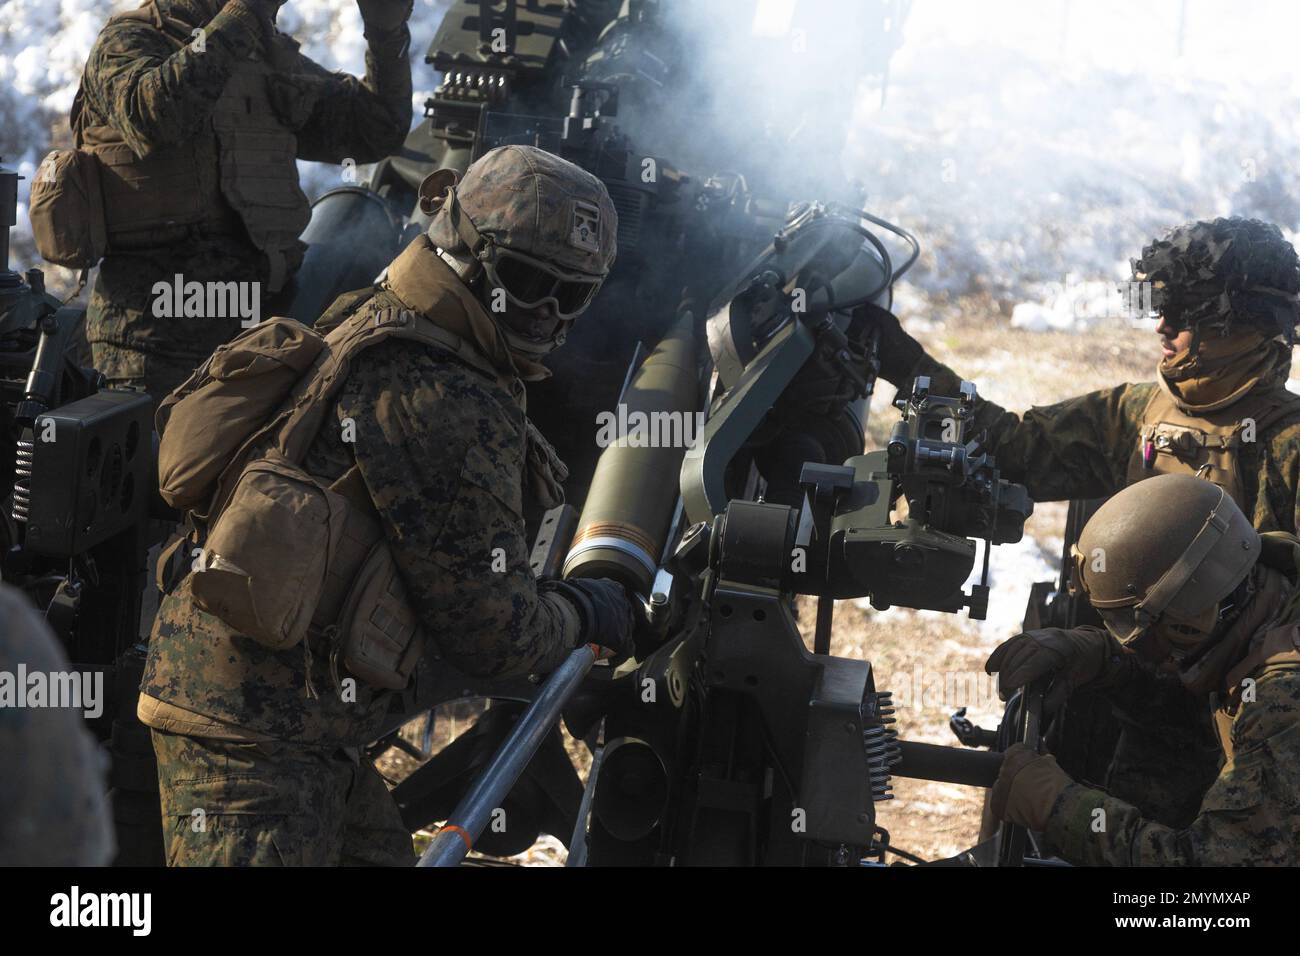 U.S. Marine Corps Lance Cpl. Terrence Hinton, a field artillery cannoneer with 3d Battalion, 12th Marines, reloads an M777 towed 155 mm howitzer while conducting live-fire training during Artillery Relocation Training Program 22.4 at the Yausubetsu Maneuver Area, Hokkaido, Japan, Jan. 30, 2023. The skills developed at ARTP increase the proficiency and readiness of the only permanently forward-deployed artillery unit in the Marine Corps, enabling them to provide precision indirect fires. Hinton is a native of Los Angeles, California. (U.S. Marine Corps photo by Lance Cpl. Jaylen Davis.) Stock Photo